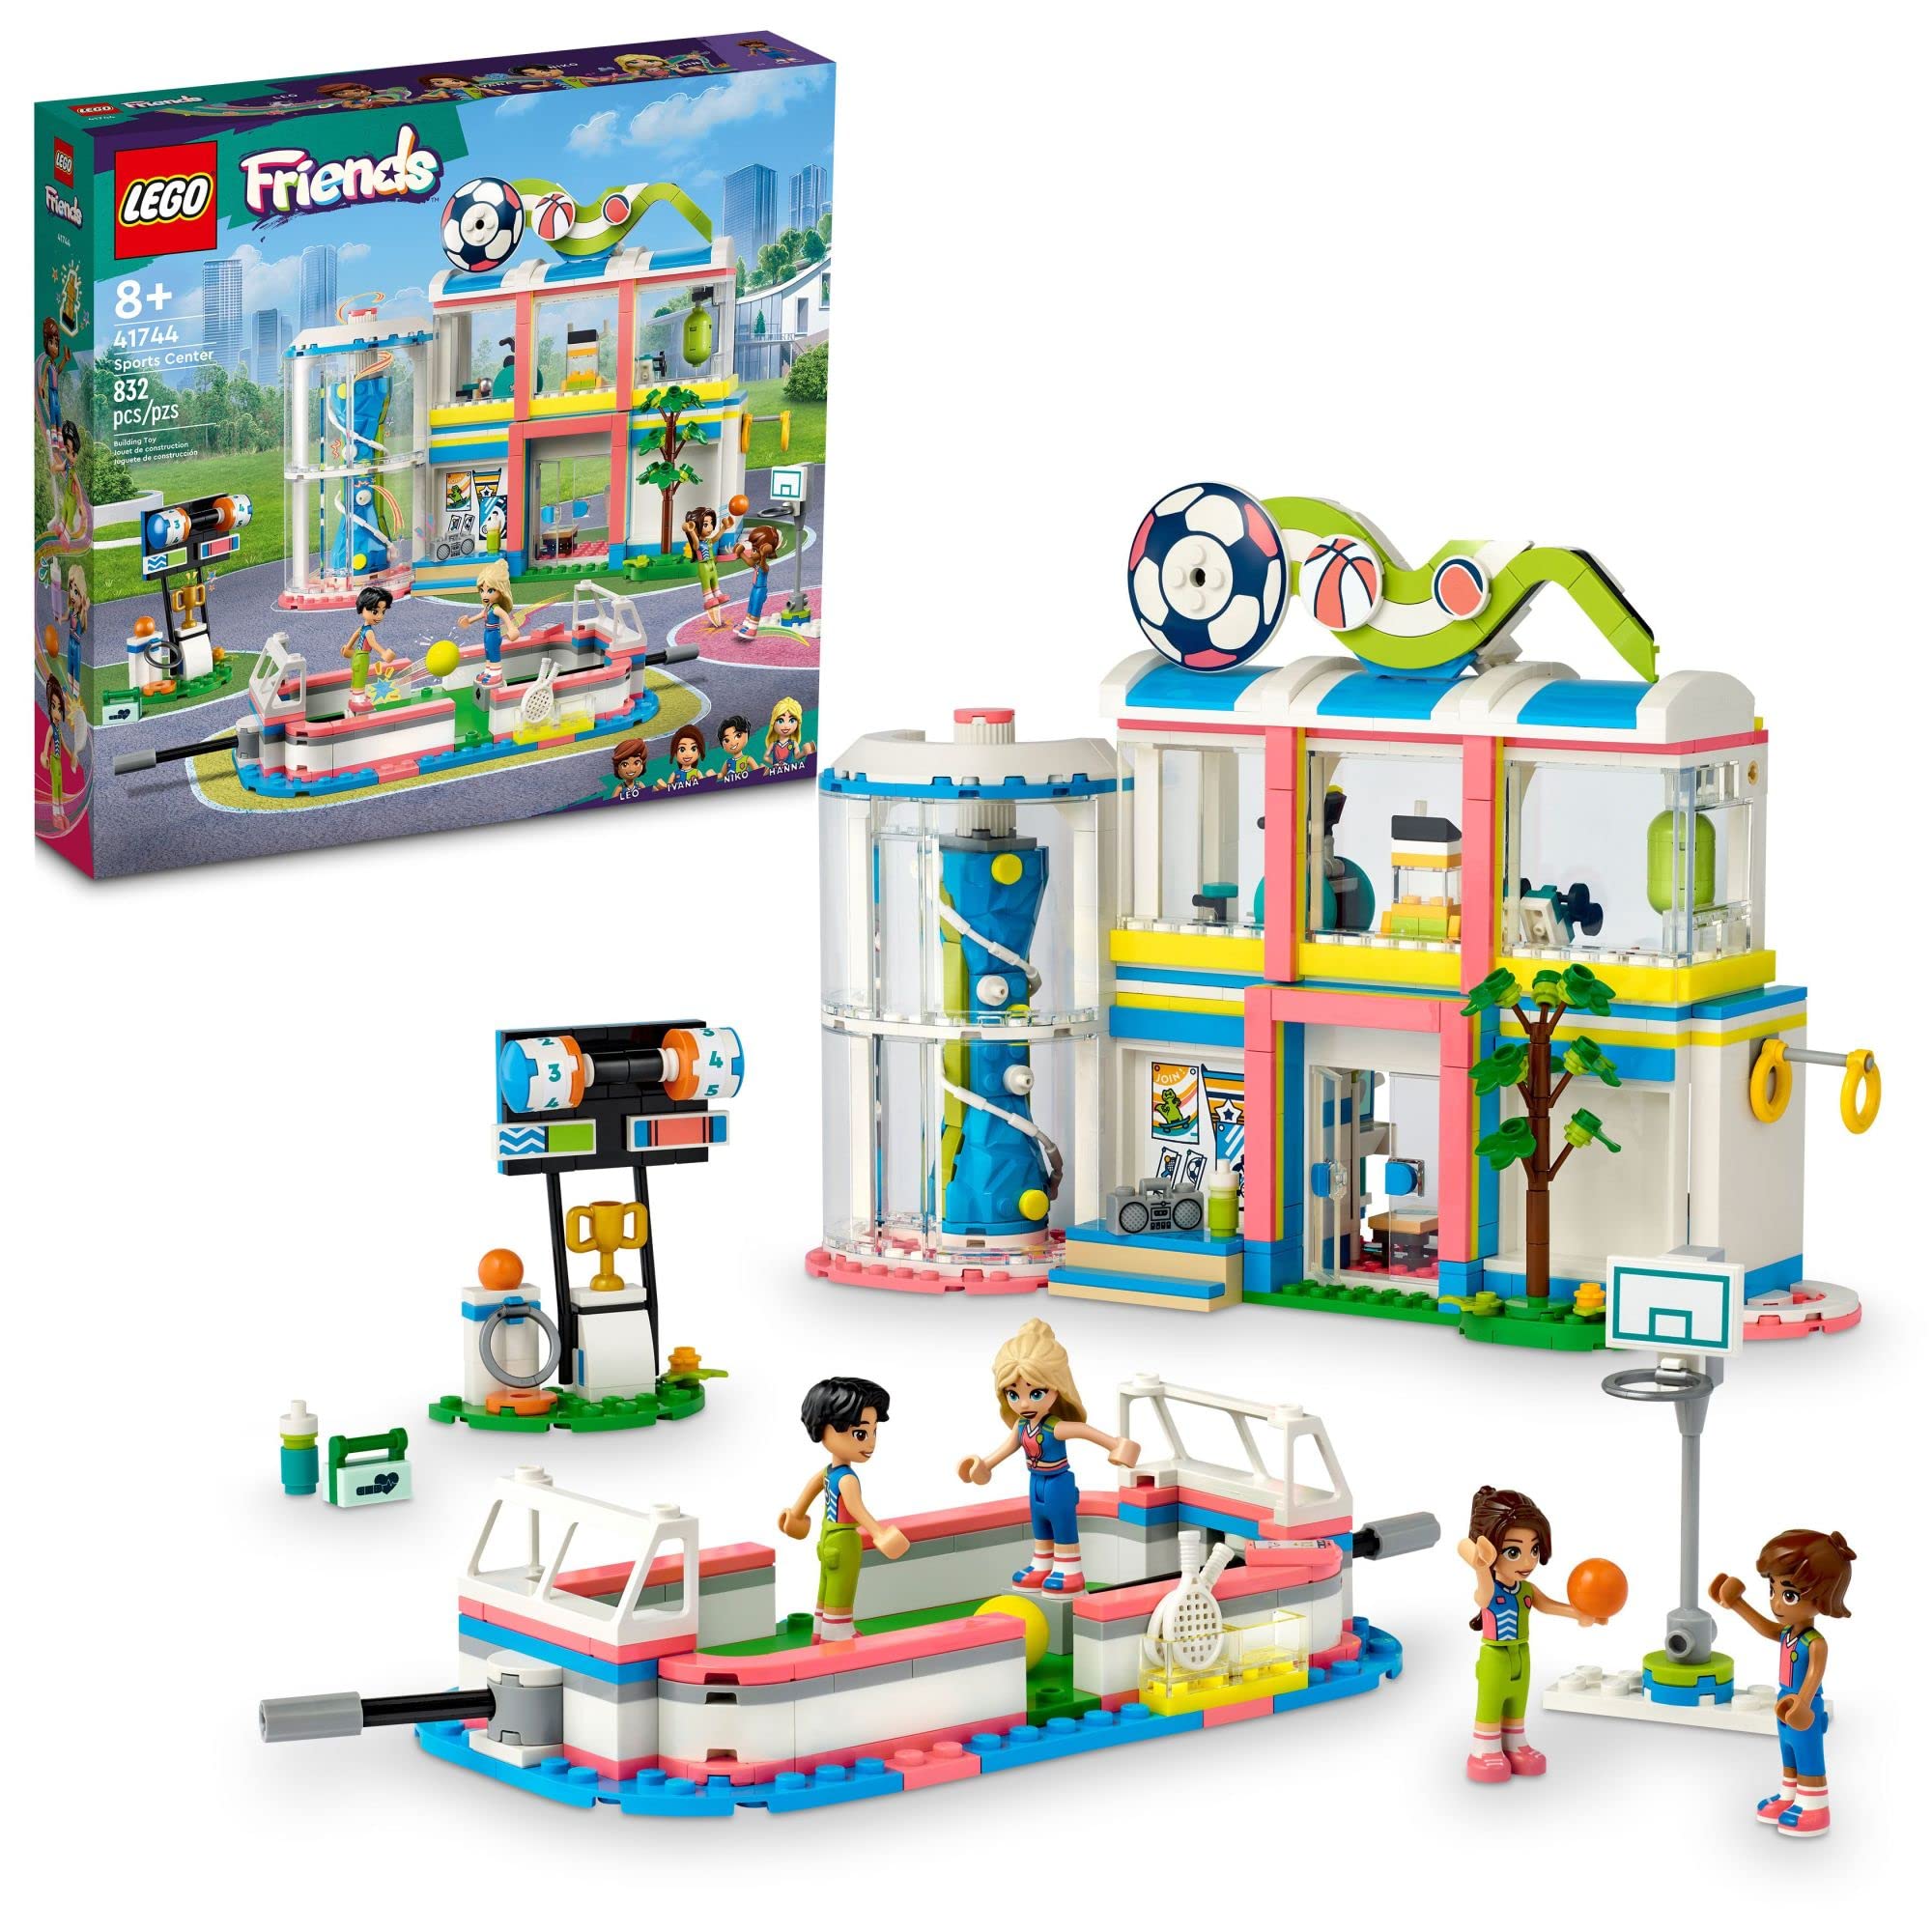 LEGO Friends Sports Center 41744 Building Toy Set,  Fun for Boys and Girls Ages 8+, Includes Football, Basketball and Tennis Games, A Fun Gift for Kids Who Love Sports and Pretend Play